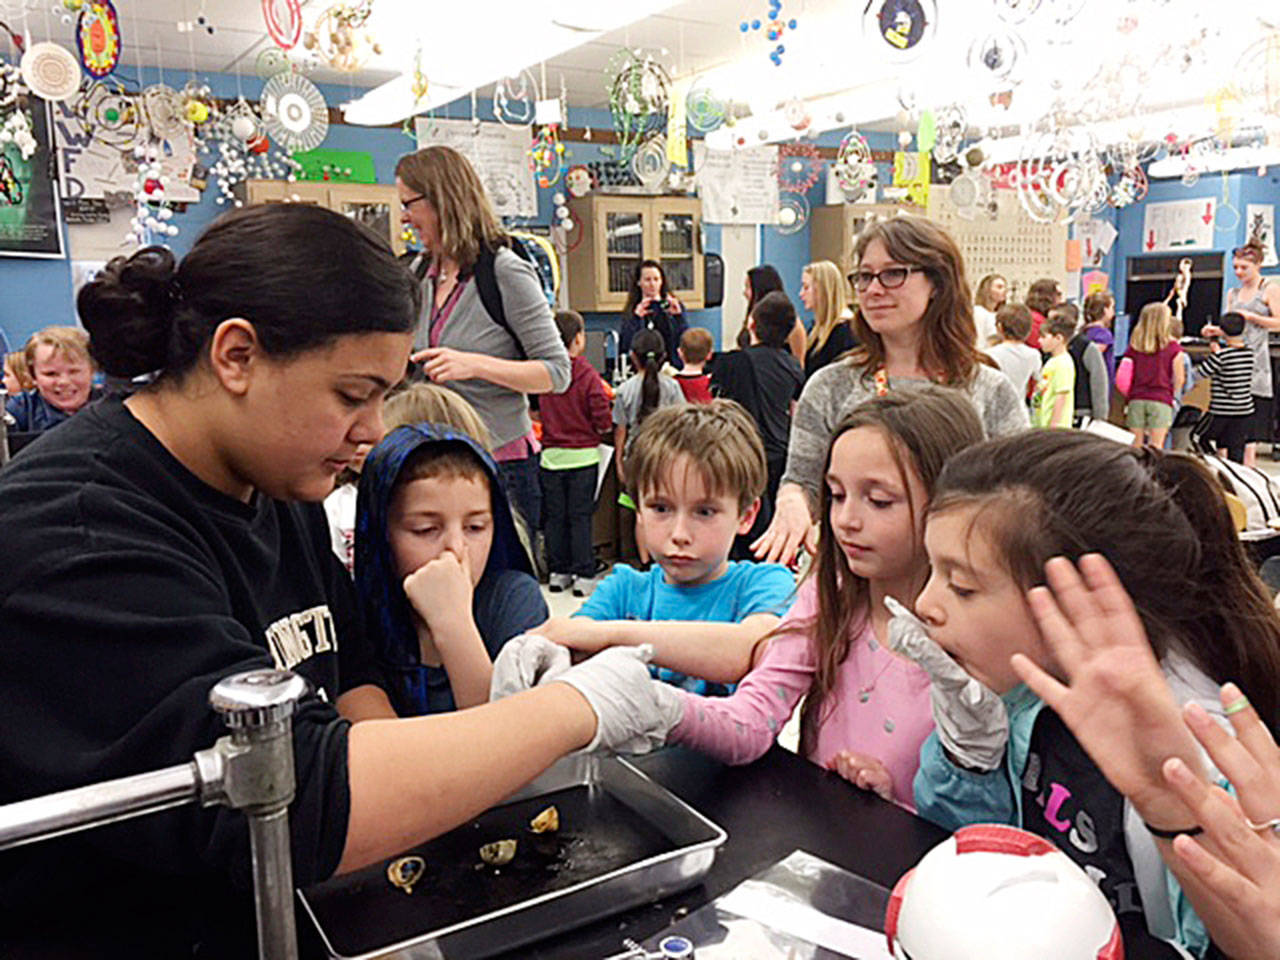 Helen Haller Elementary School students (from left) Chaos Mulet, Aidan Coonelly, Khloee Taylor and Madison Edwards visit Isaac Rapelje’s high school science class. Submitted photo